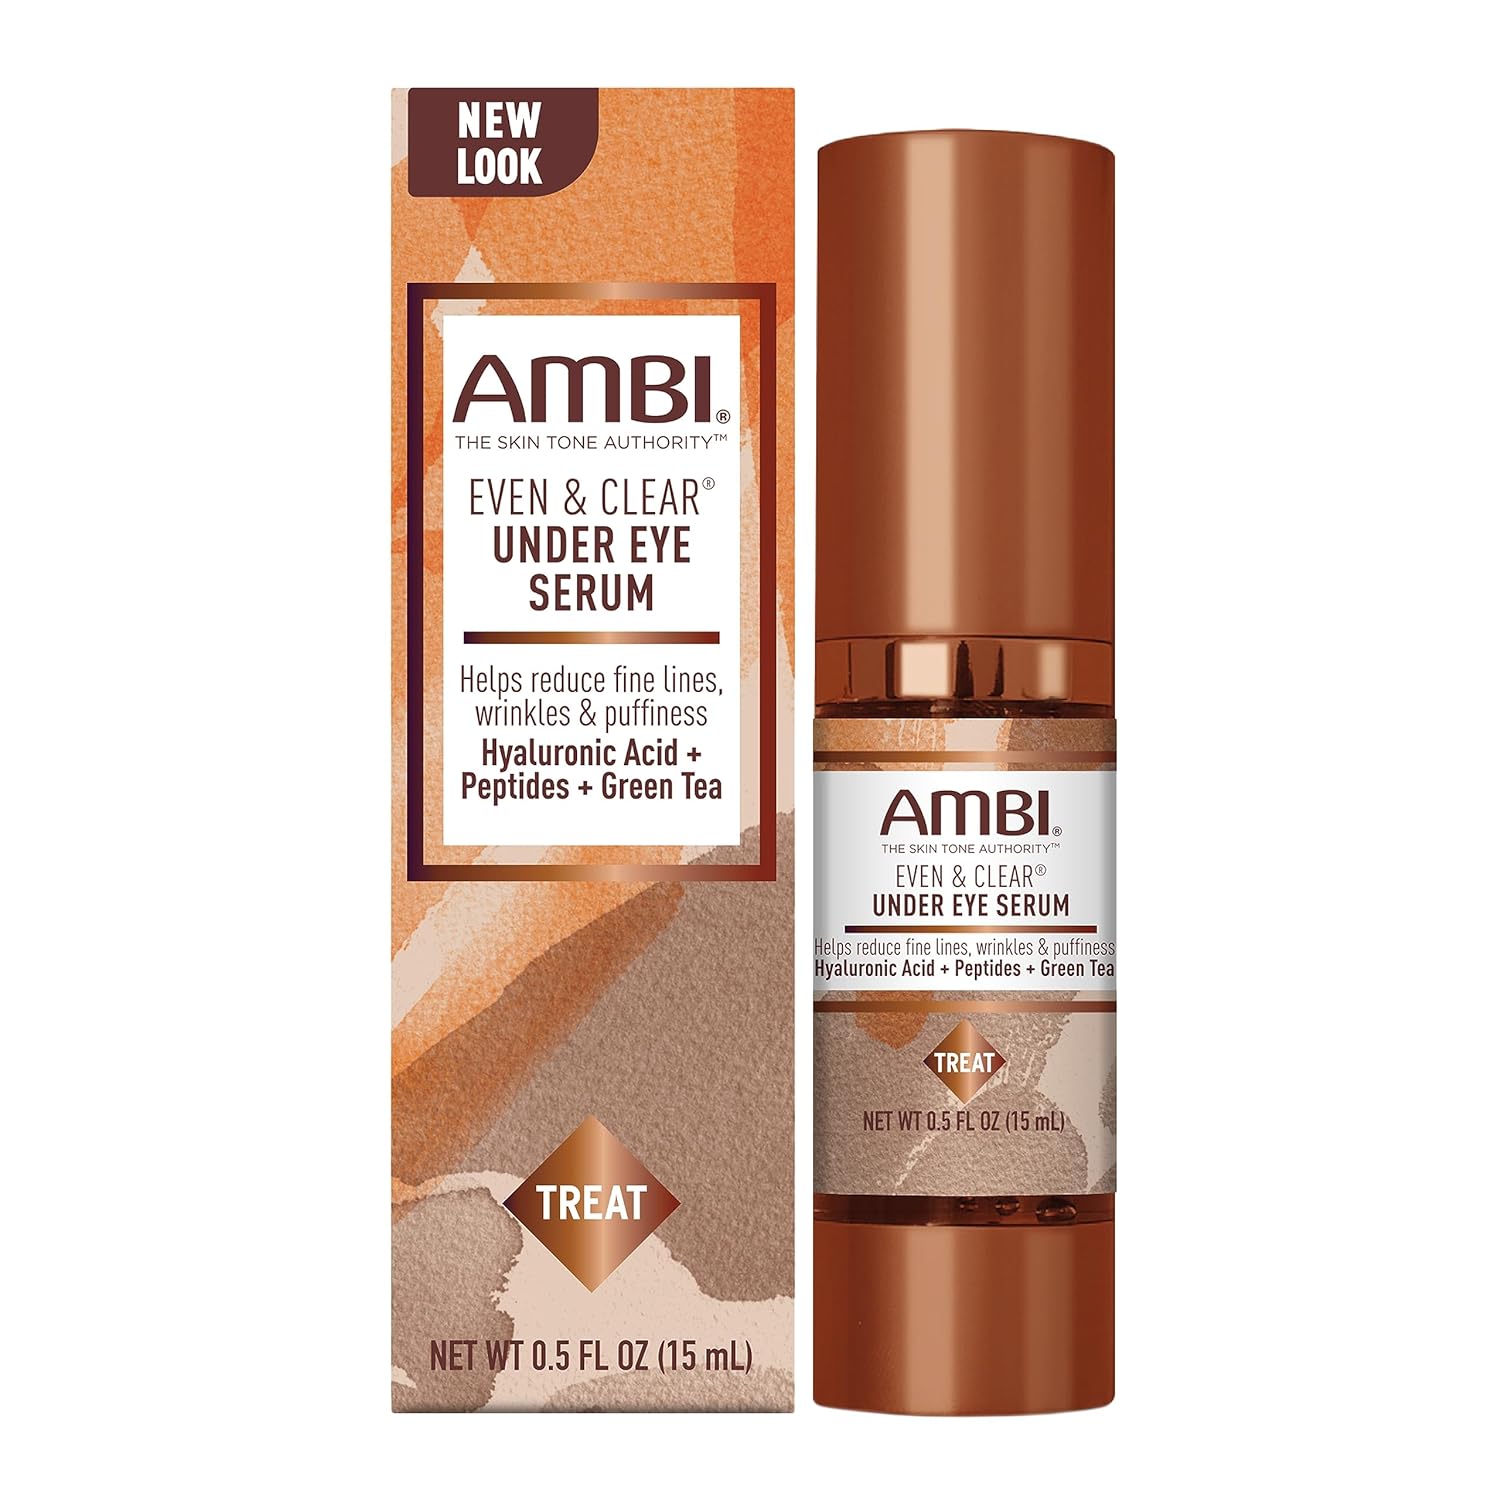 Ambi Even & Clear Under Eye Serum for All Skin Types; Anti Aging Formula features Peptides, Hyal